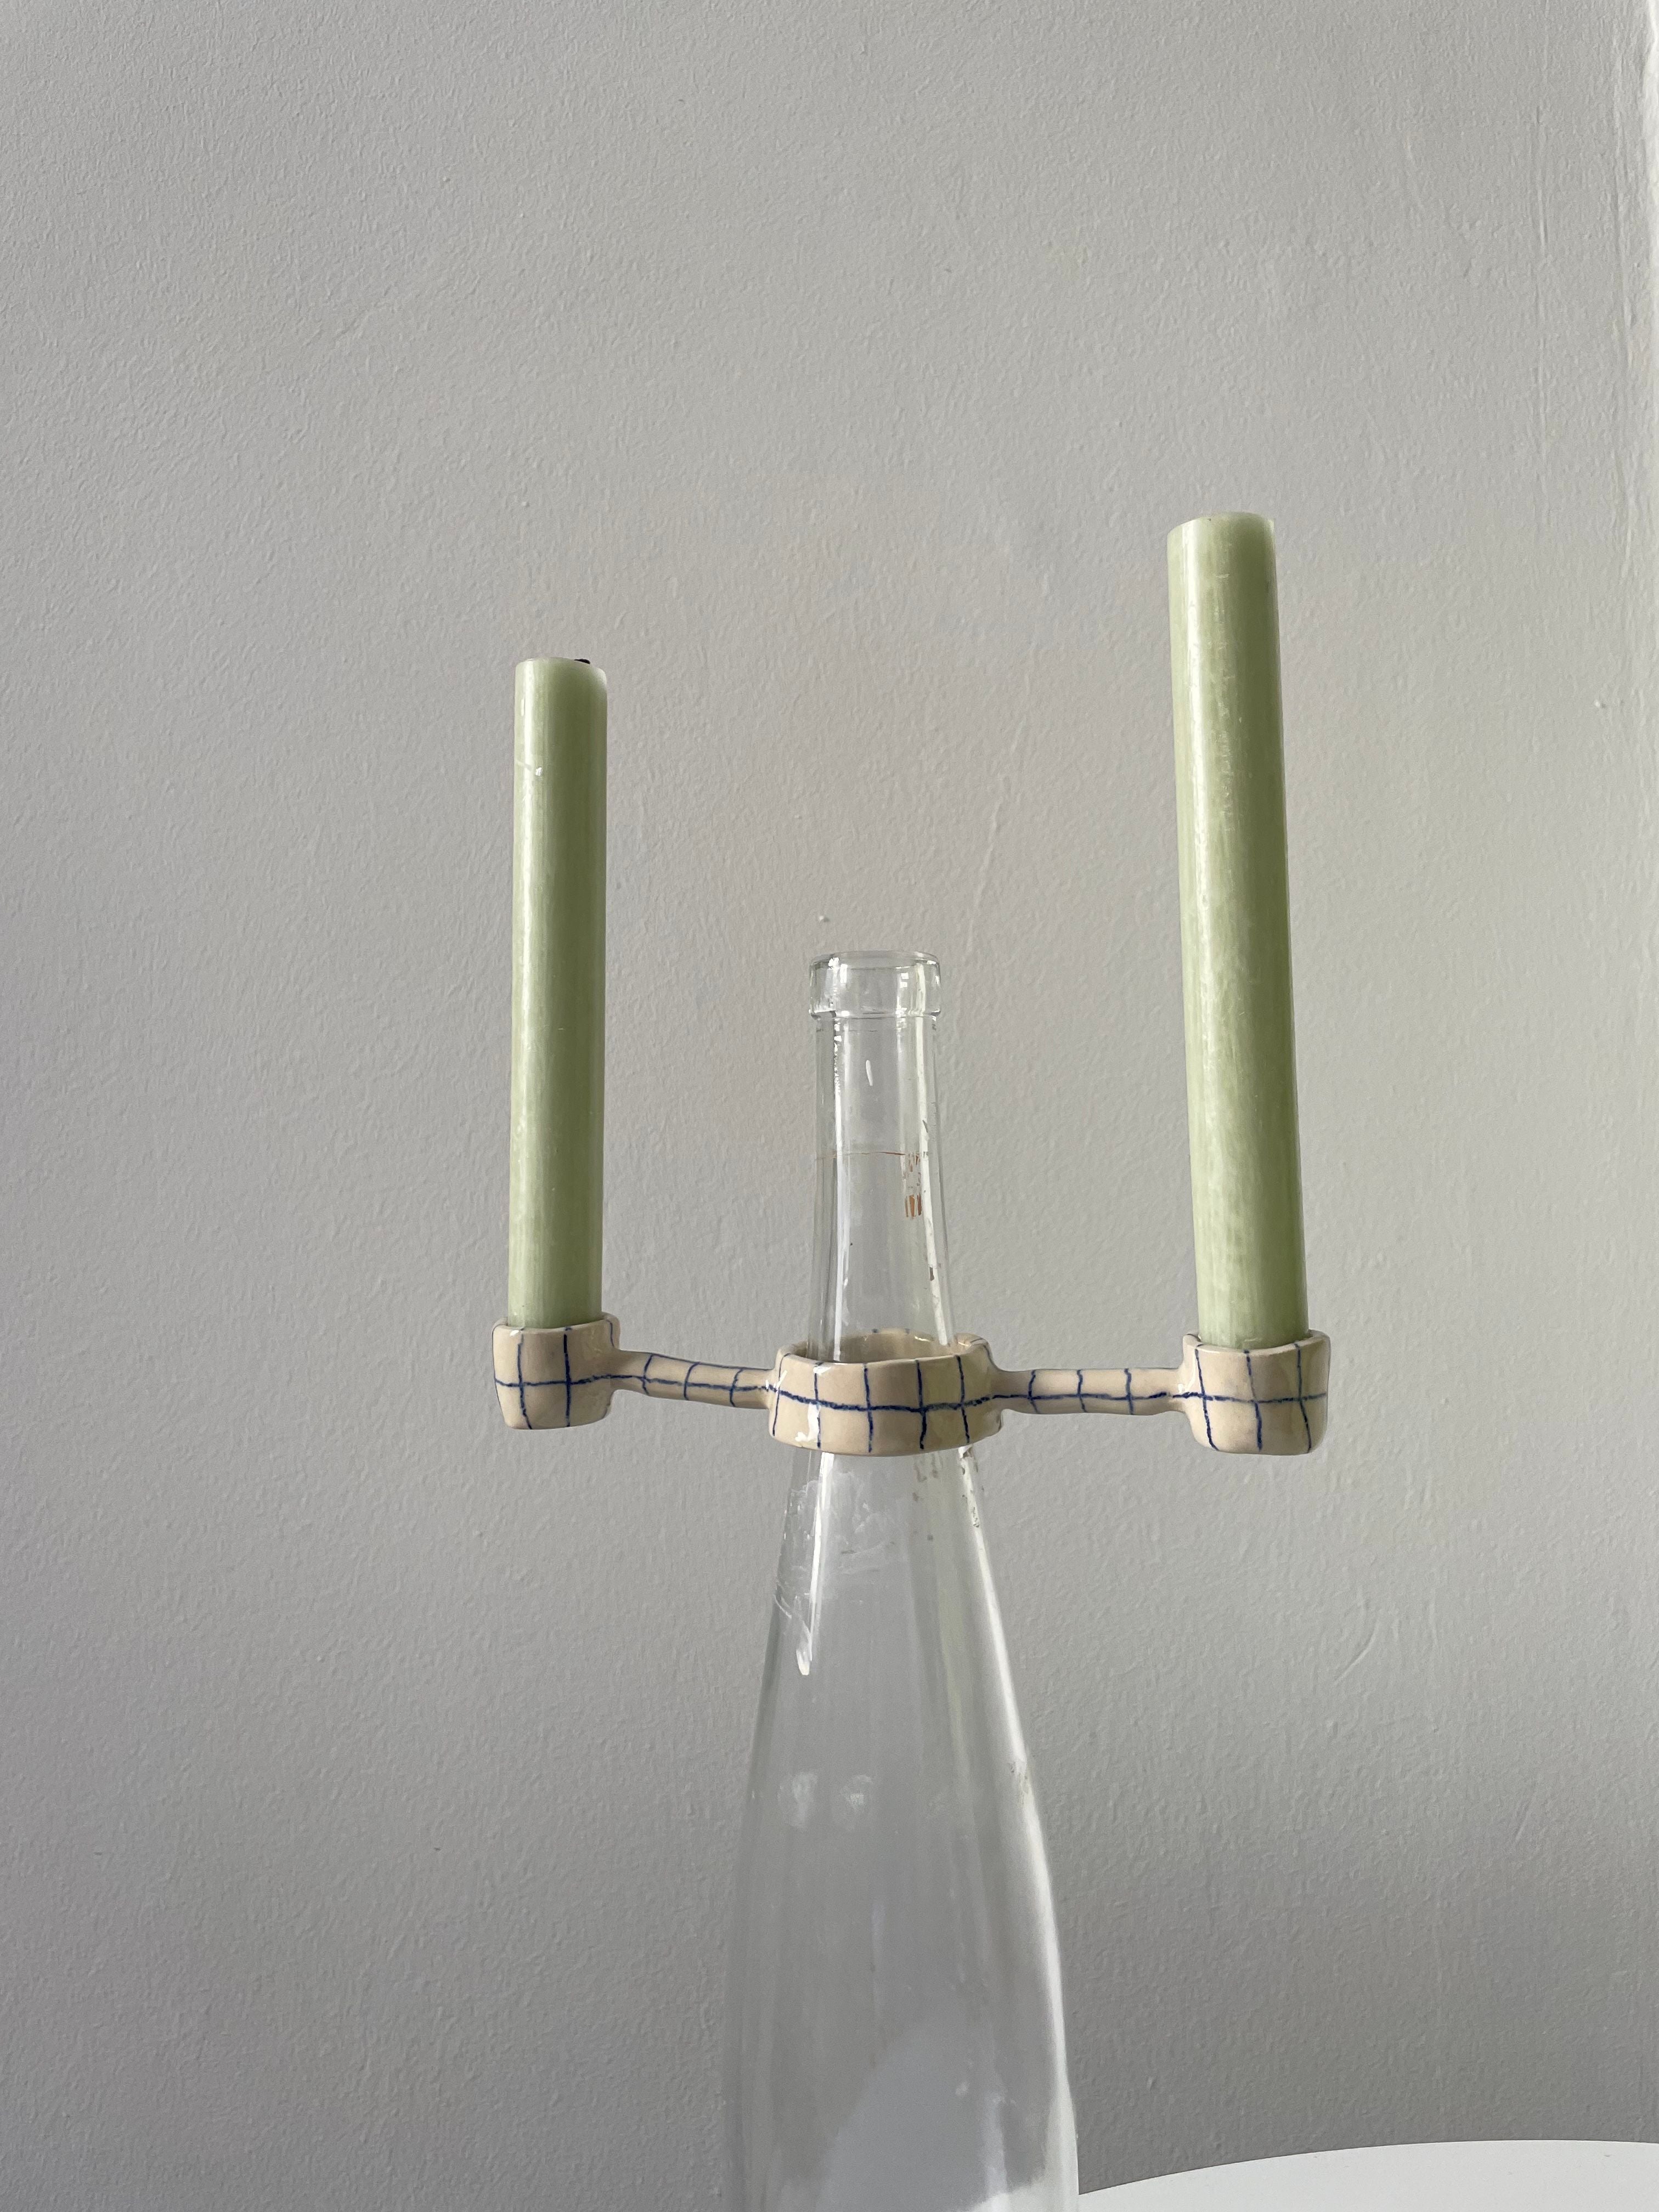 Beautiful and elegant Odette candle holder with intricate design and metallic finish